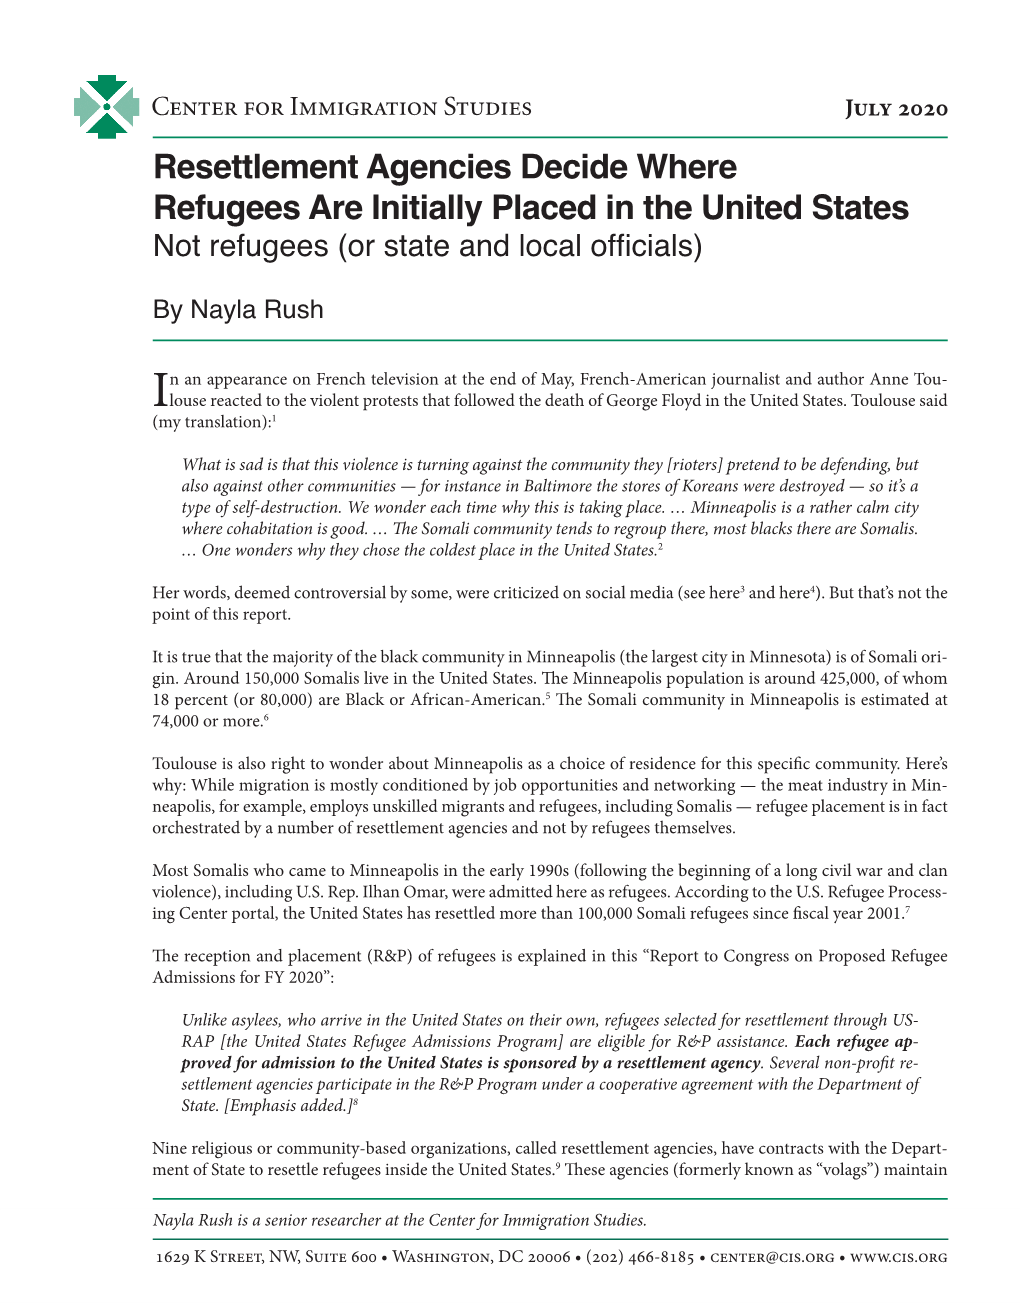 Resettlement Agencies Decide Where Refugees Are Initially Placed in the United States Not Refugees (Or State and Local Officials)